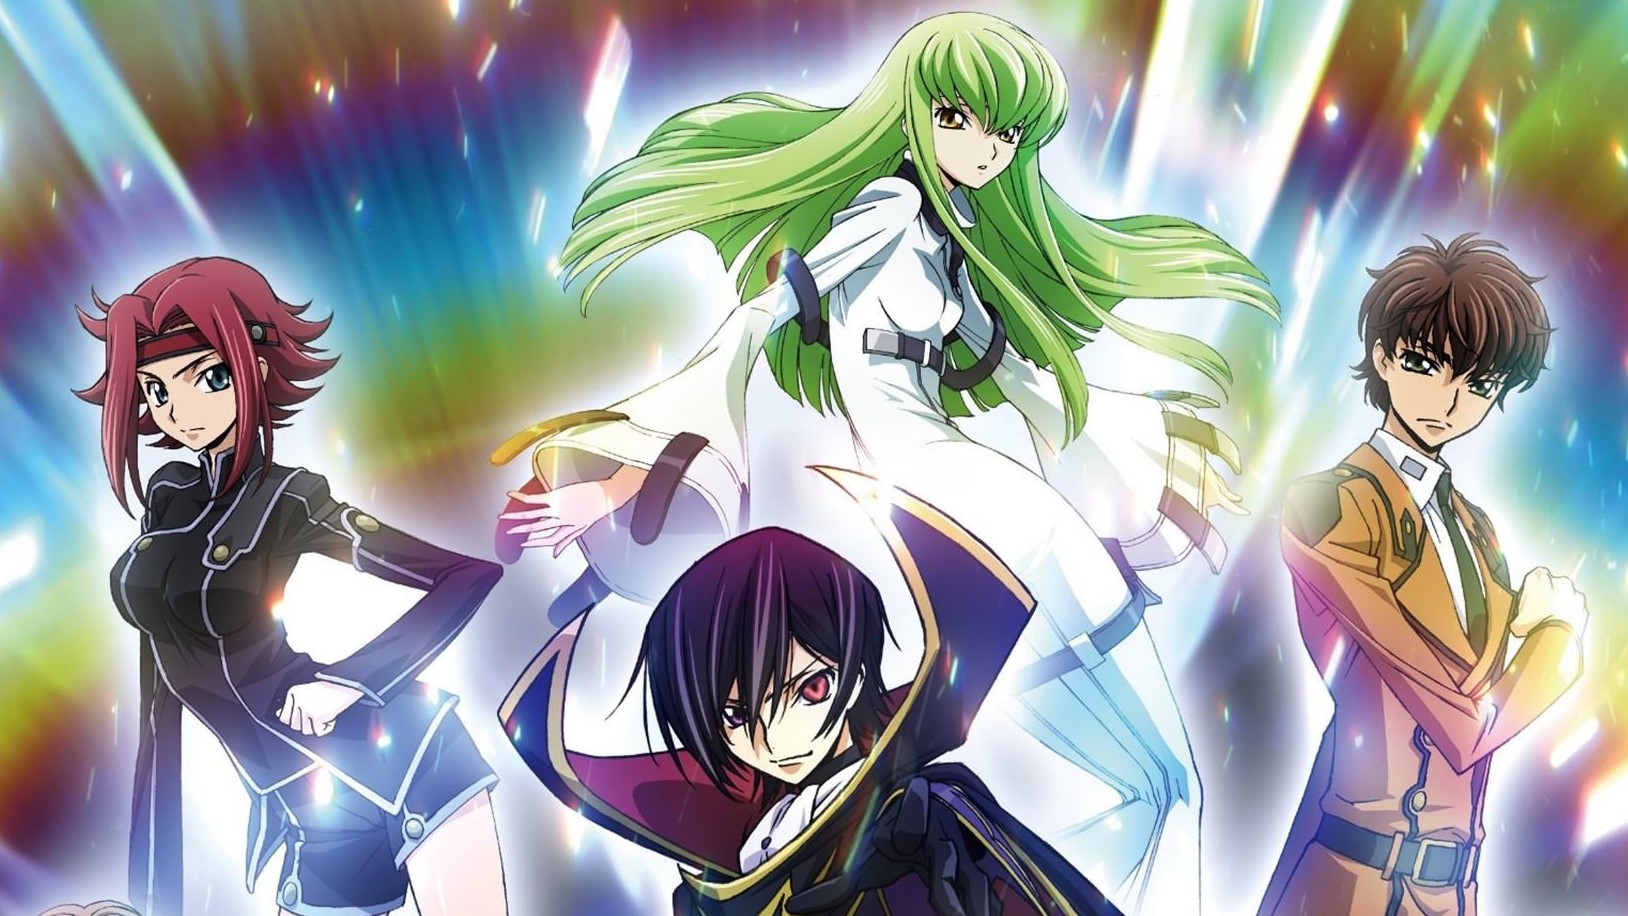 Do we really need more sequels? “Code Geass Season 3: Lelouch Of The  Resurrection”